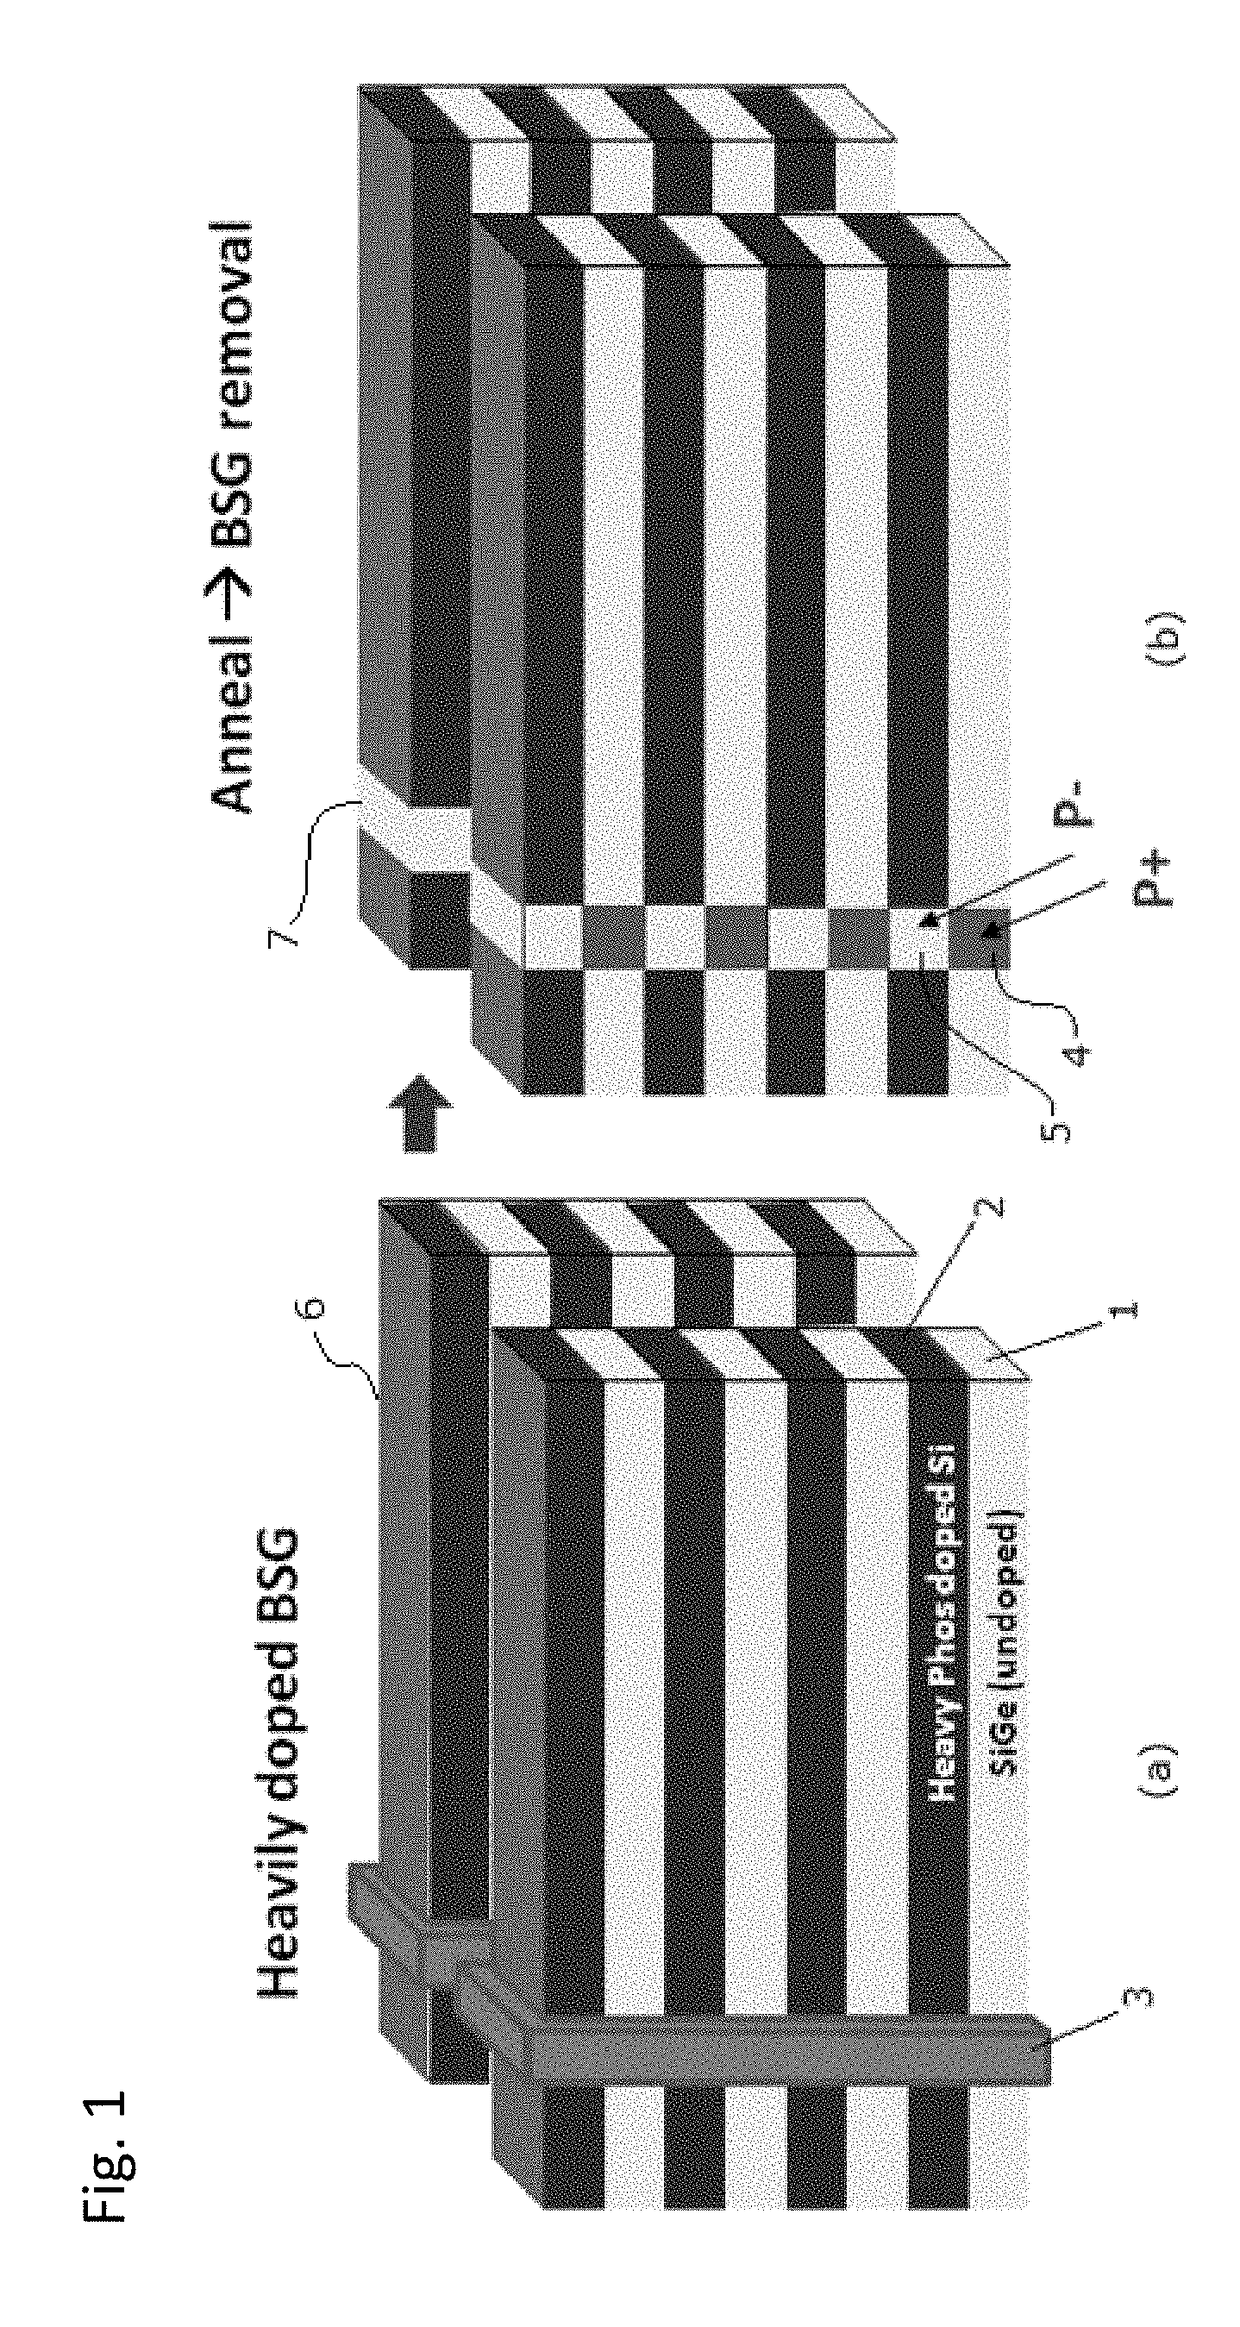 3D stacked multilayer semiconductor memory using doped select transistor channel